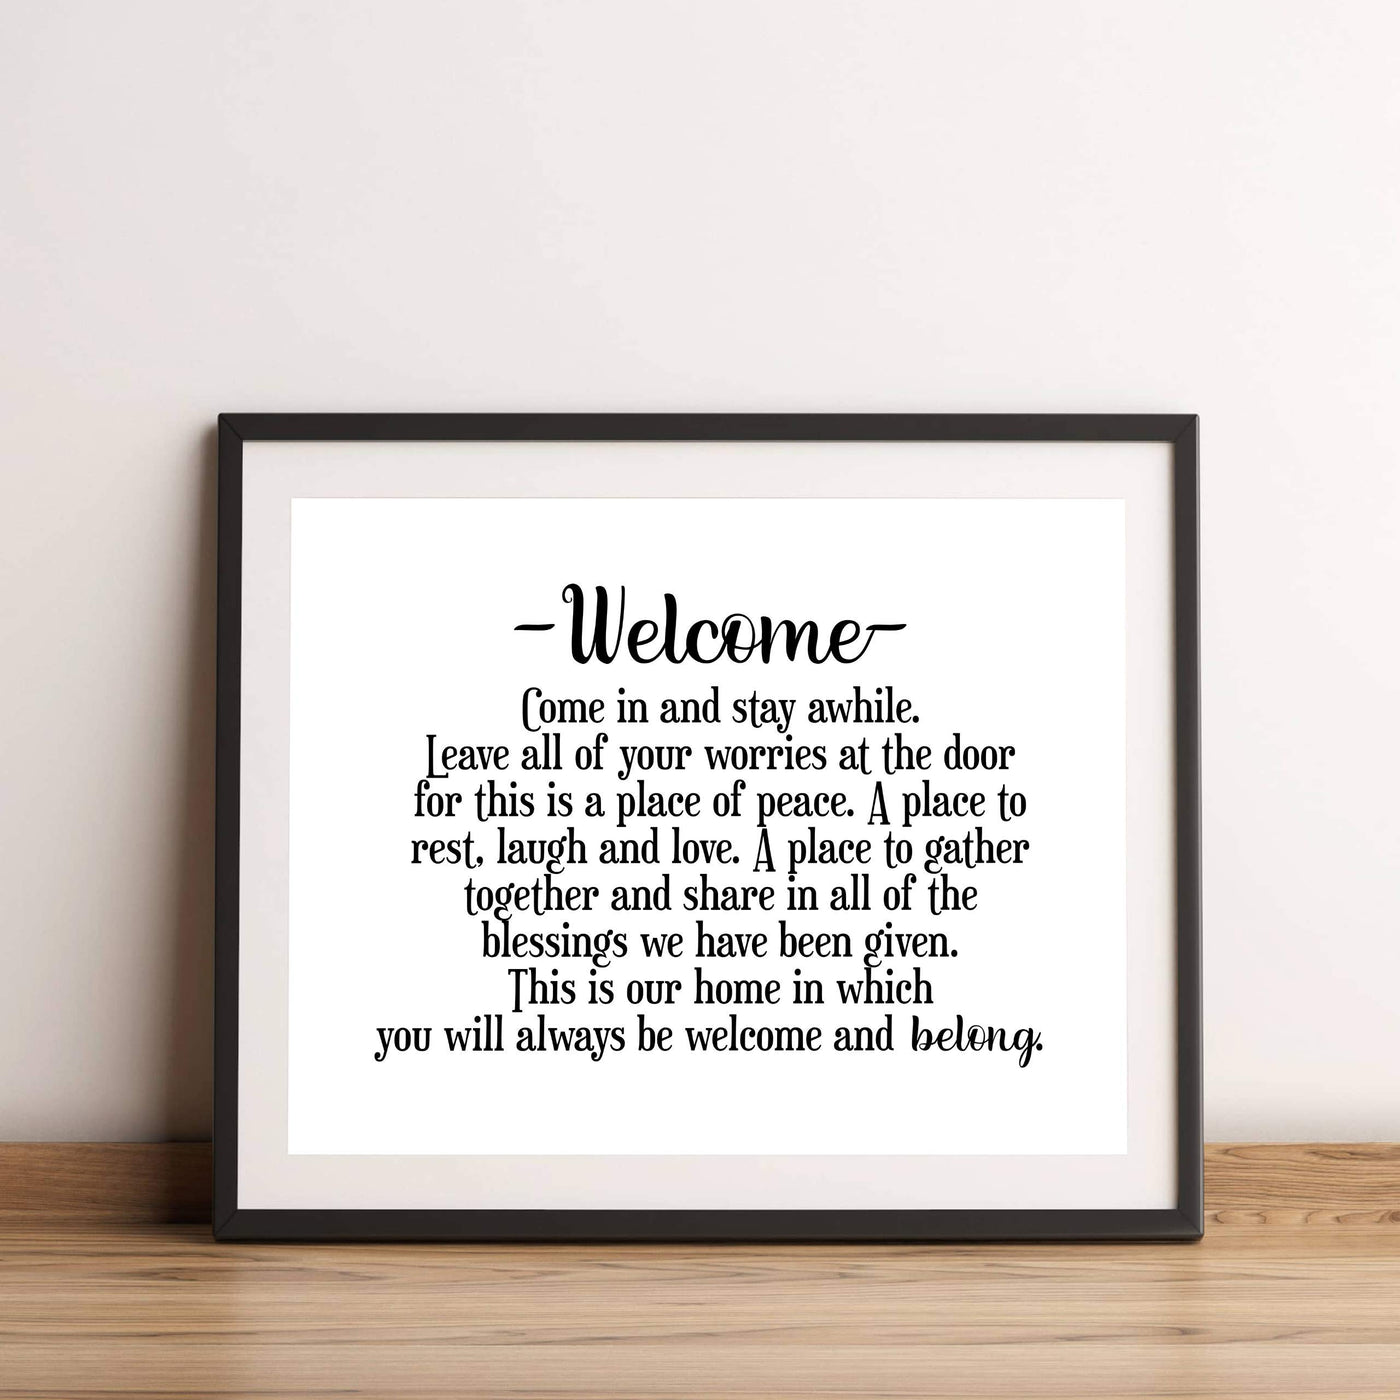 Welcome-Come In and Stay Awhile Inspirational Family Wall Decor -14 x 11" Typographic Art Print-Ready to Frame. Home-Entryway-Porch-Patio Decor. Perfect Welcome Sign-Great Housewarming Gift!